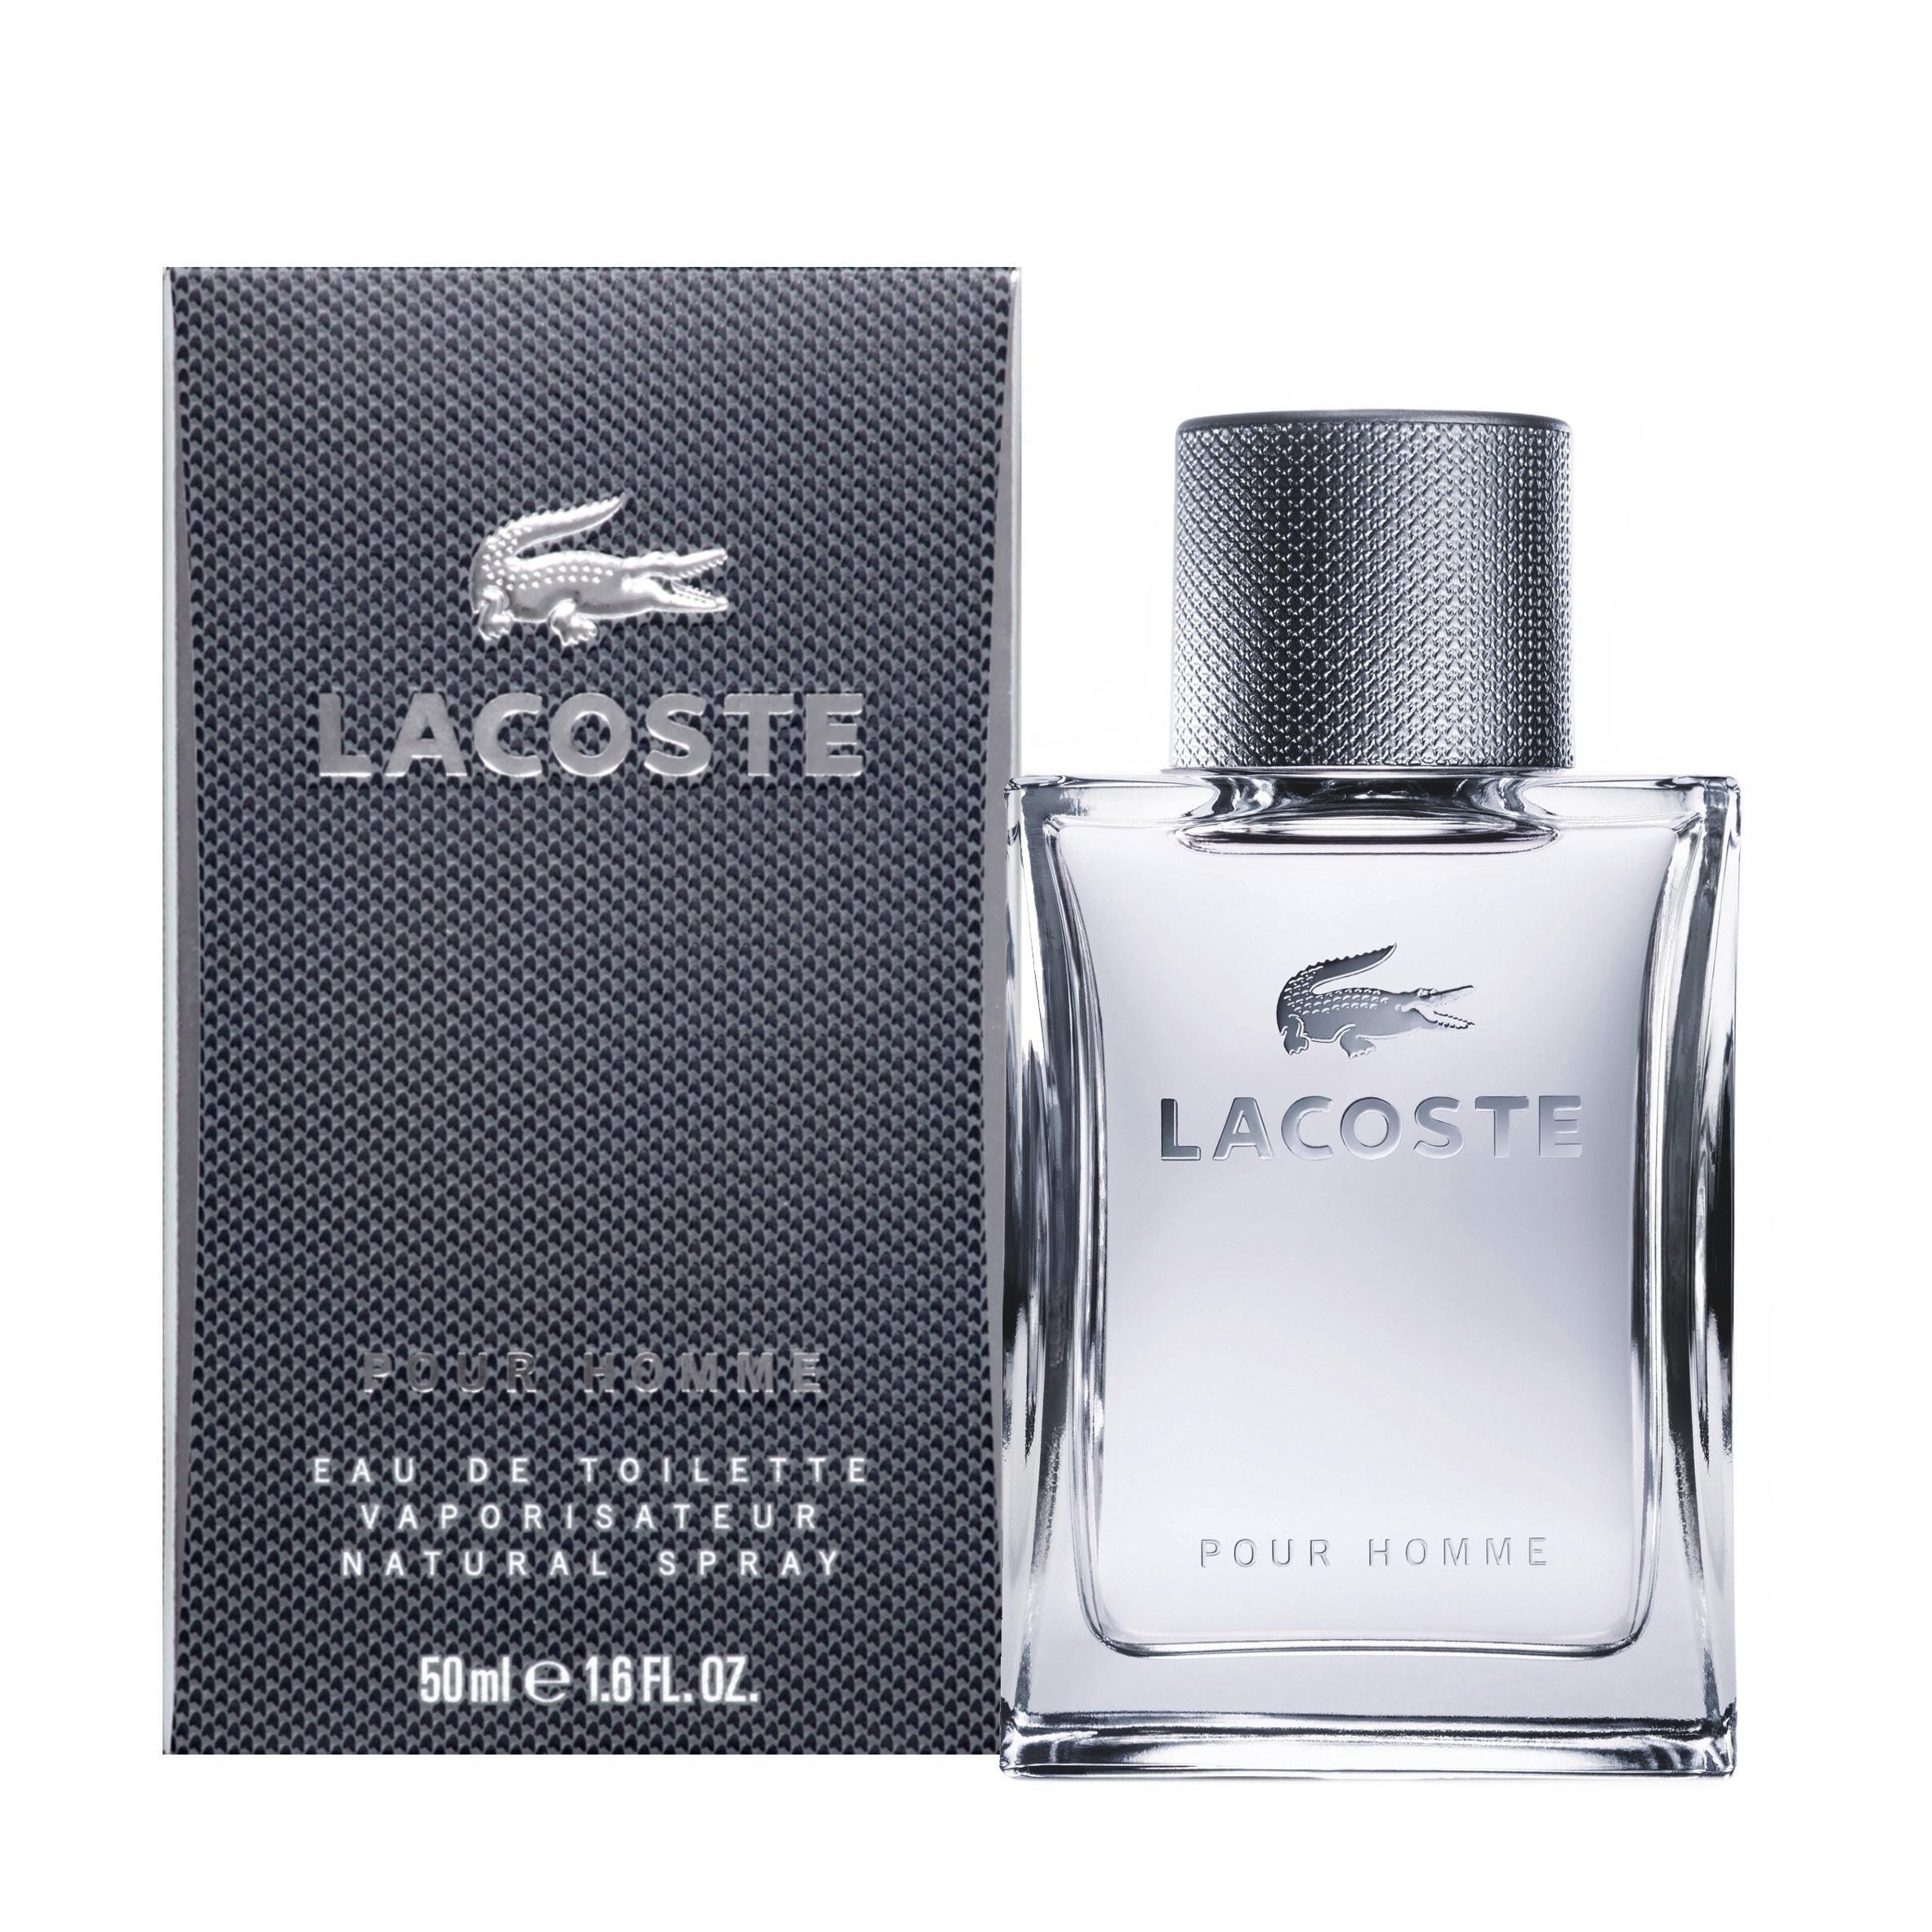 Лакост вода для мужчин. Lacoste Lacoste pour homme 100 мл. Лакост Пур хом мужские. Lacoste pour homme (m) EDT 100 ml. Лакосте Пур хом мужские 50 мл.